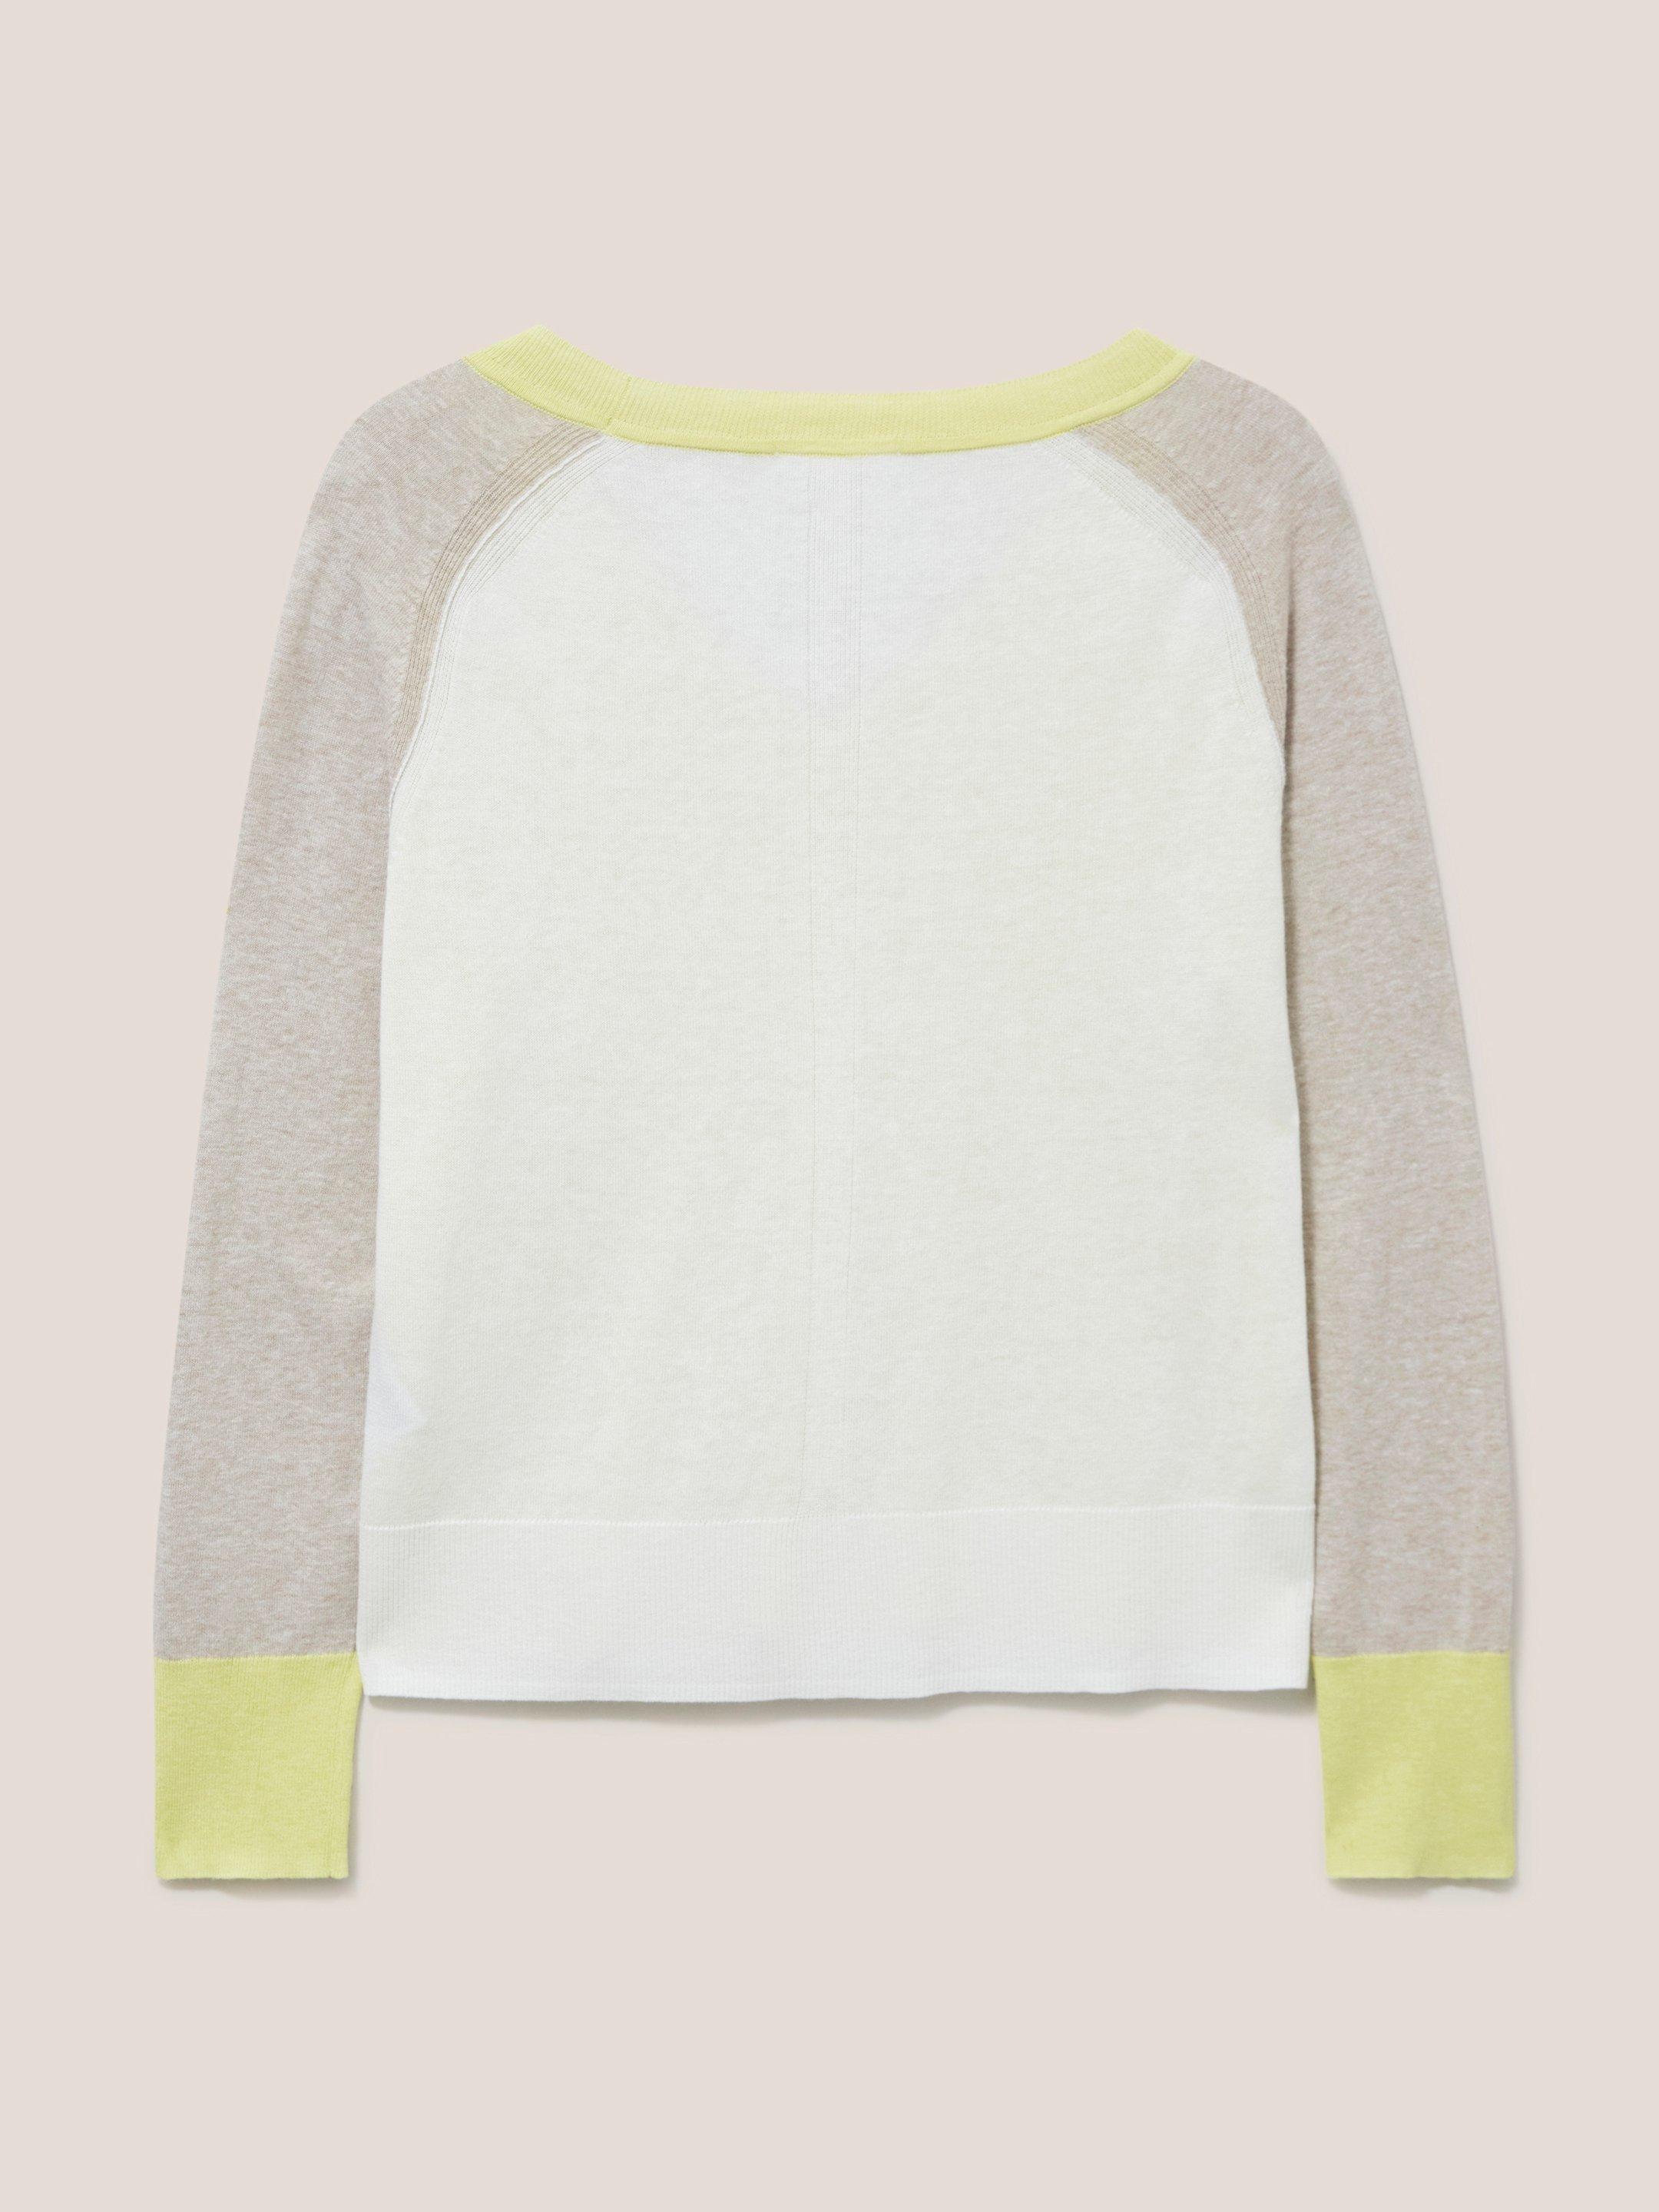 CARRIE COLOURBLOCK JUMPER in YELLOW MLT - FLAT BACK